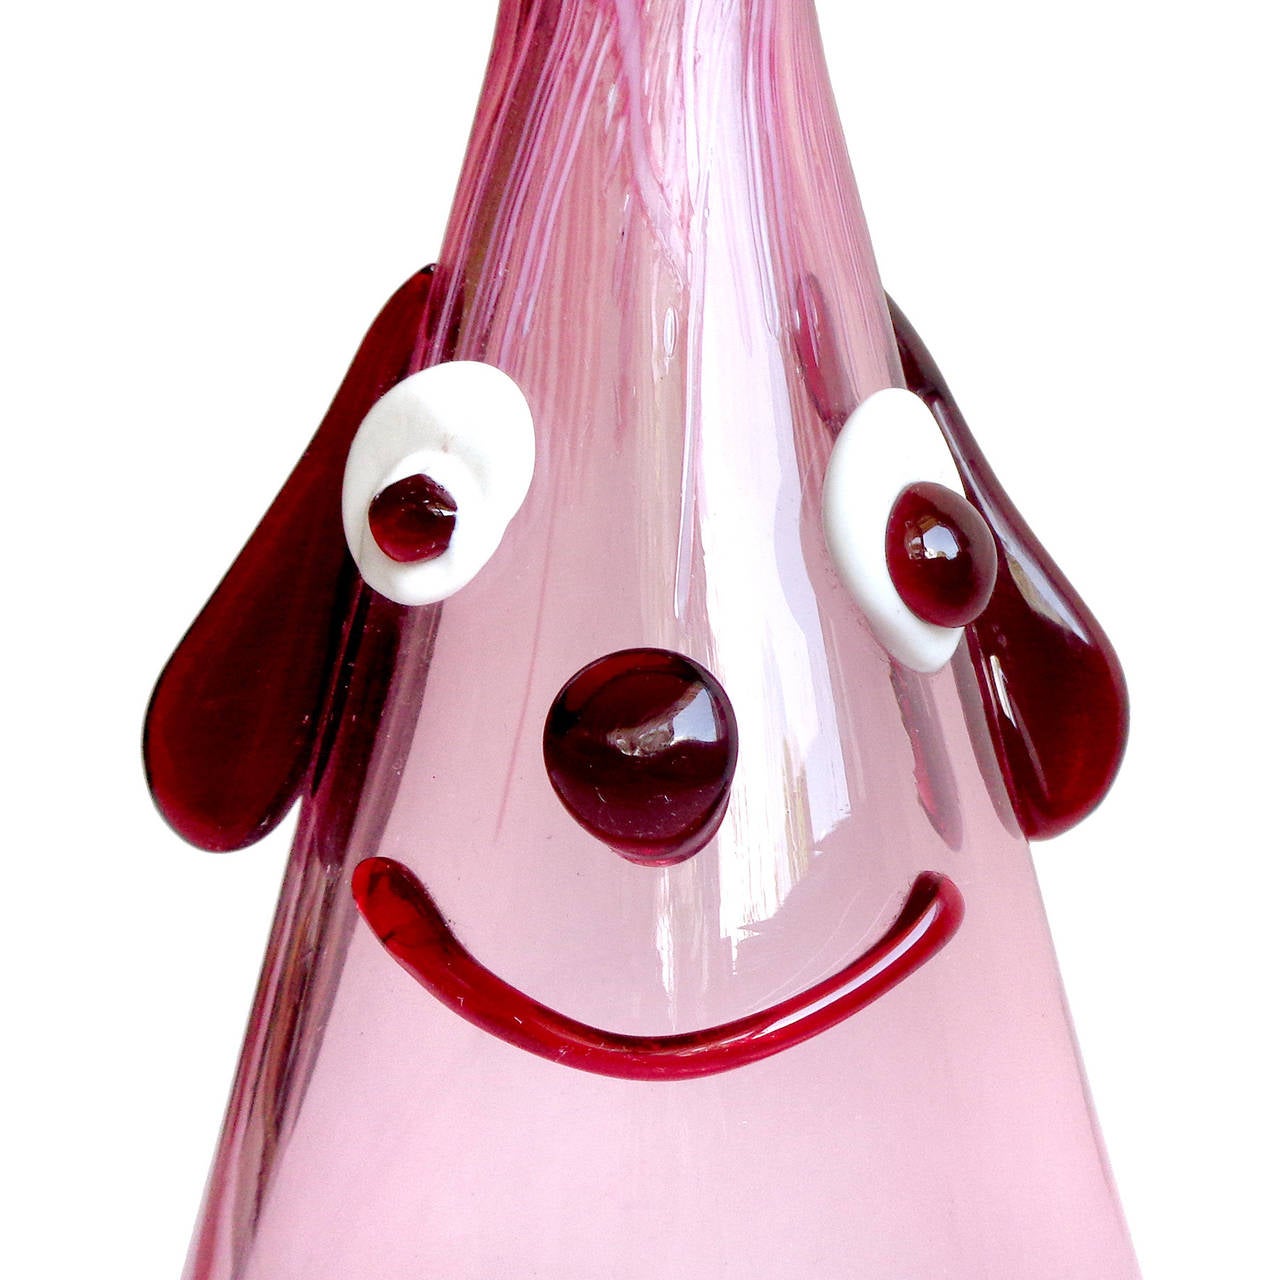 Free shipping worldwide! See details below description.

Cute and unusual Murano handblown cranberry pink, with applied red and white clown face. Documented to the Fratelli Toso Company. The piece has droopy ears, wide eyes, a big smile and